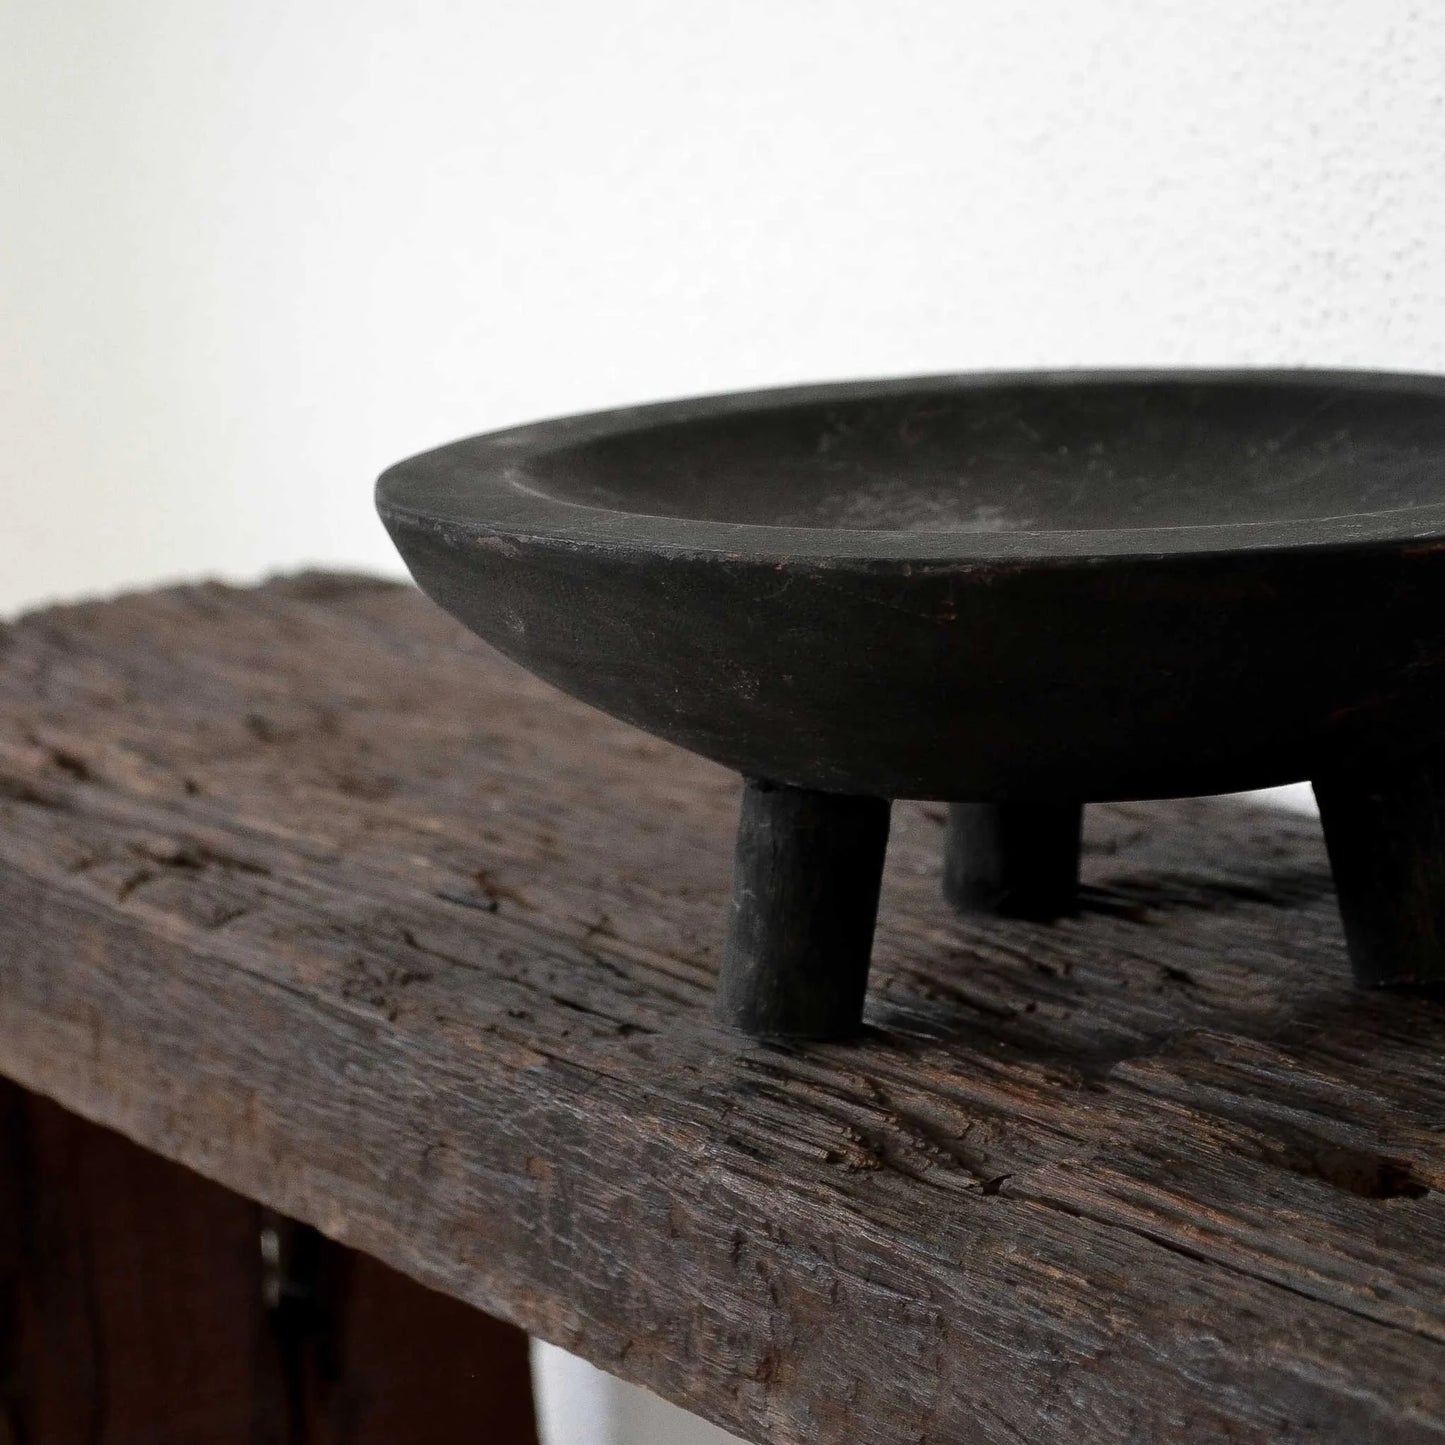 Image of the Ritual Offering Bowl from Terra Cruda's Australian homewares collection